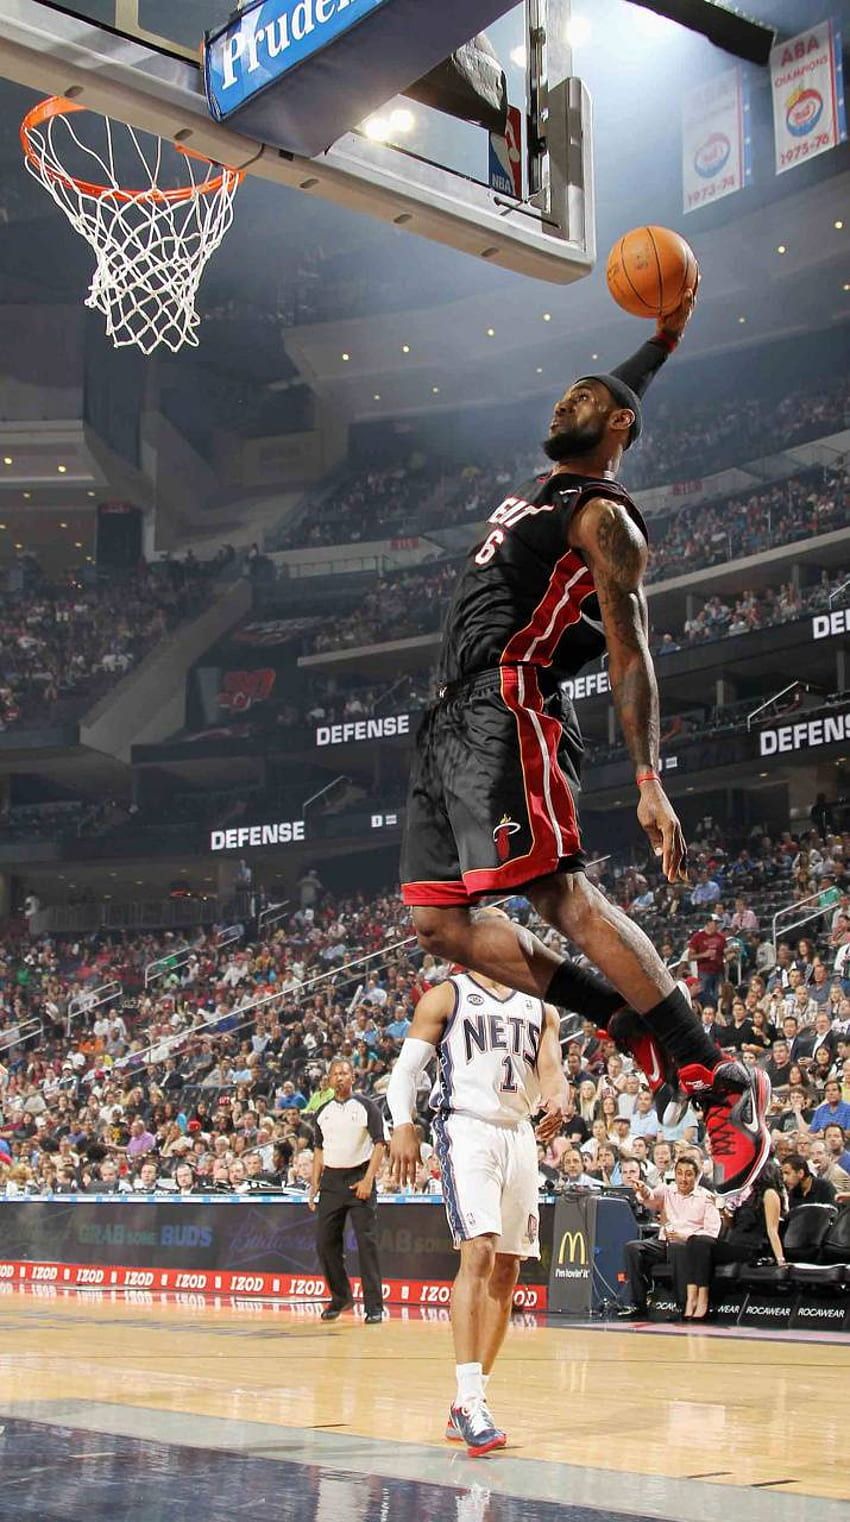 LeBron James goes up for a dunk against the Nets. - NBA